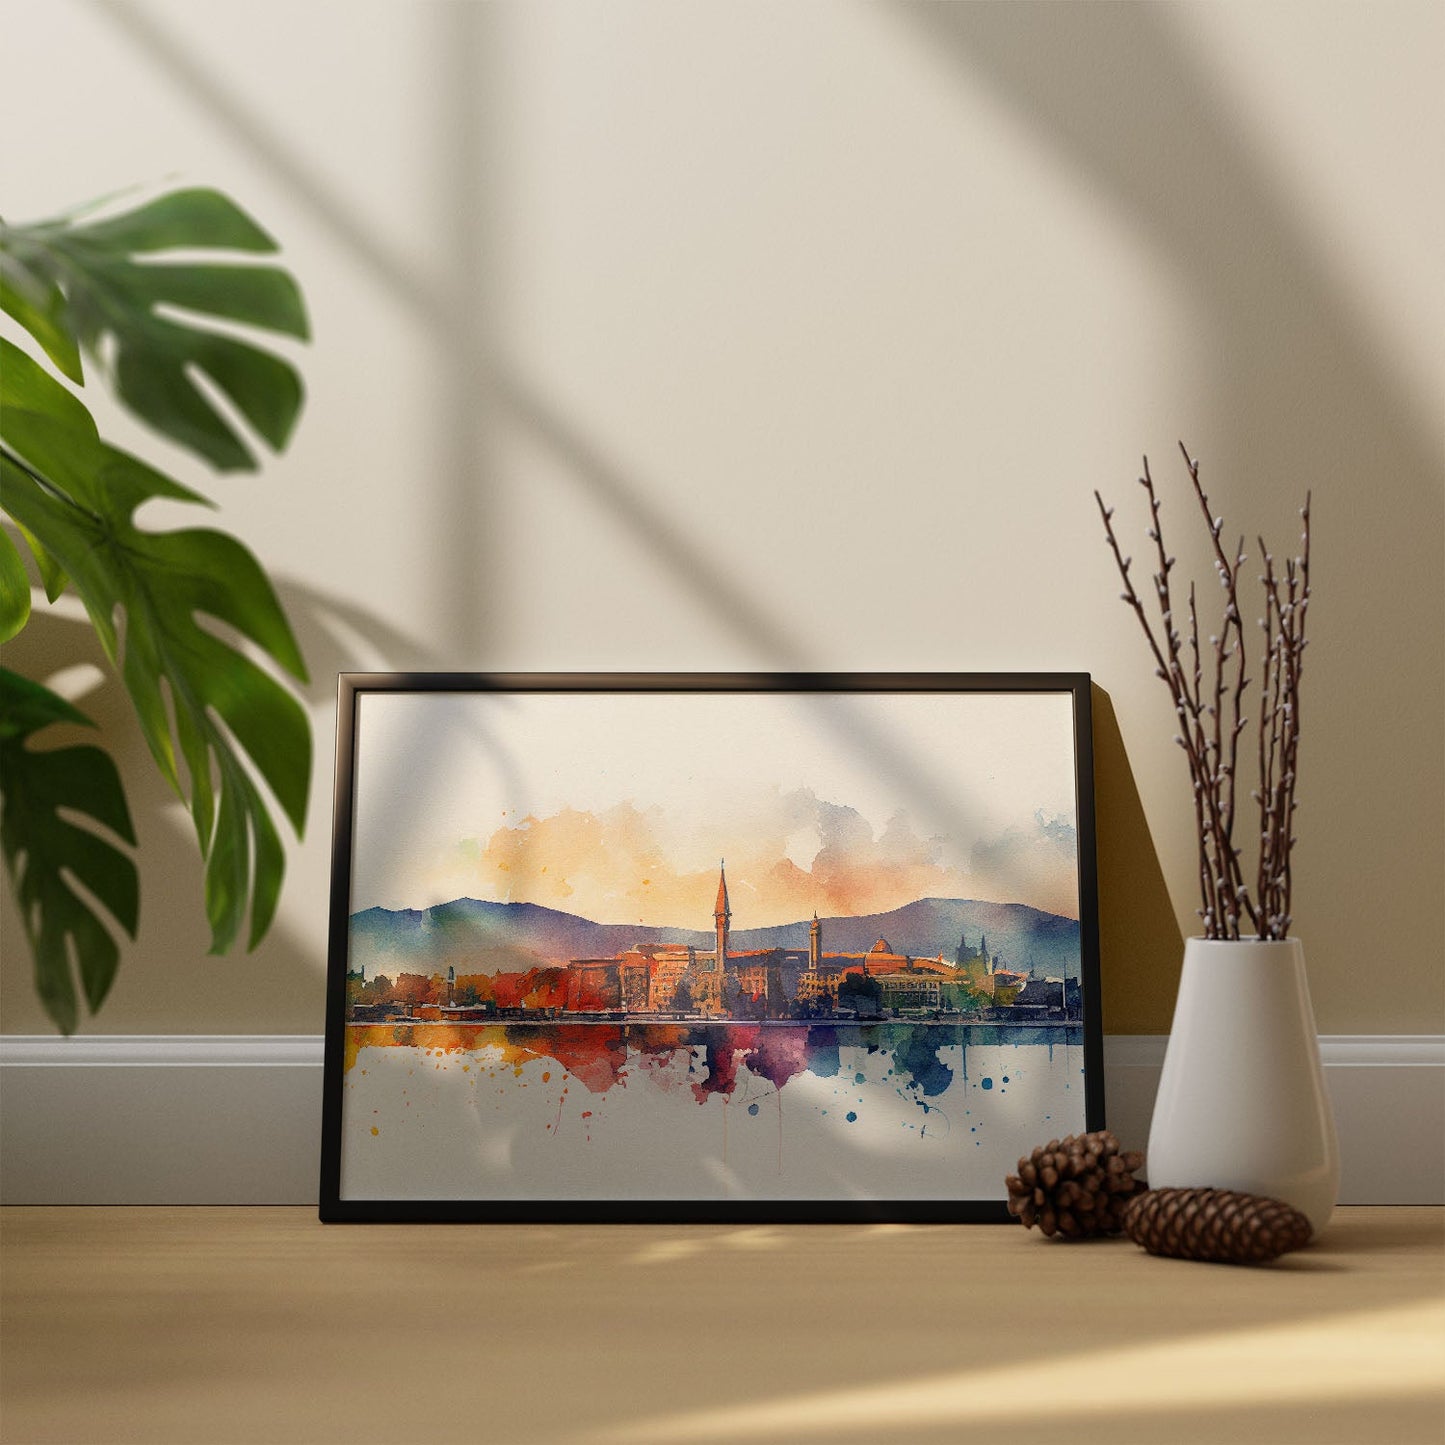 Nacnic watercolor of a skyline of the city of Geneva_2. Aesthetic Wall Art Prints for Bedroom or Living Room Design.-Artwork-Nacnic-A4-Sin Marco-Nacnic Estudio SL